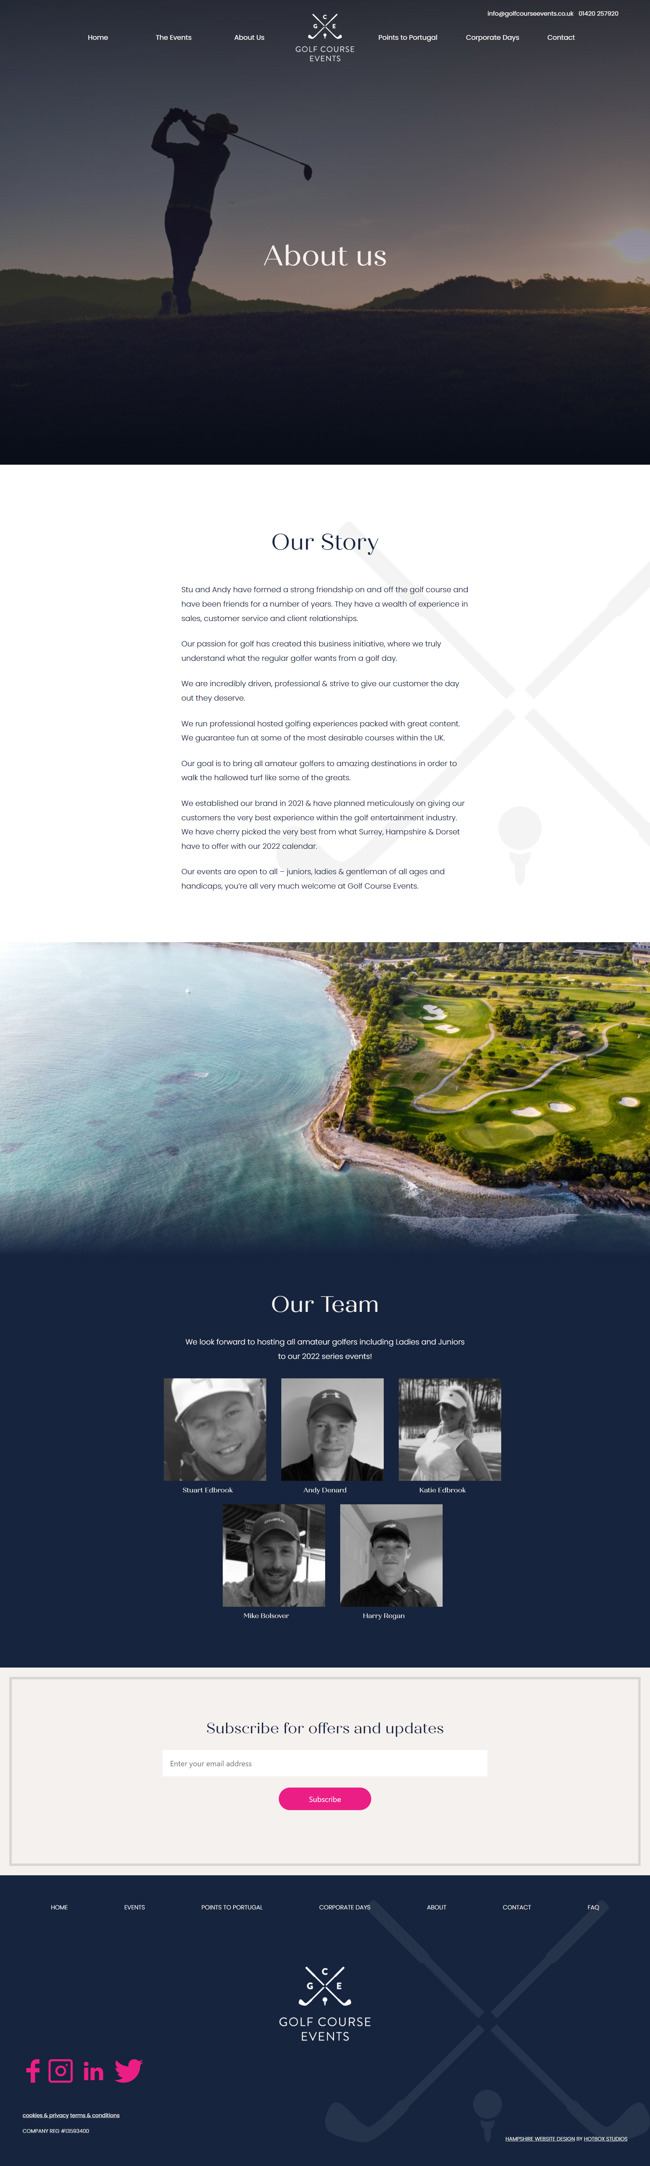 Golf Course Events Website Design And Wordpress Web Development SP010 About Us